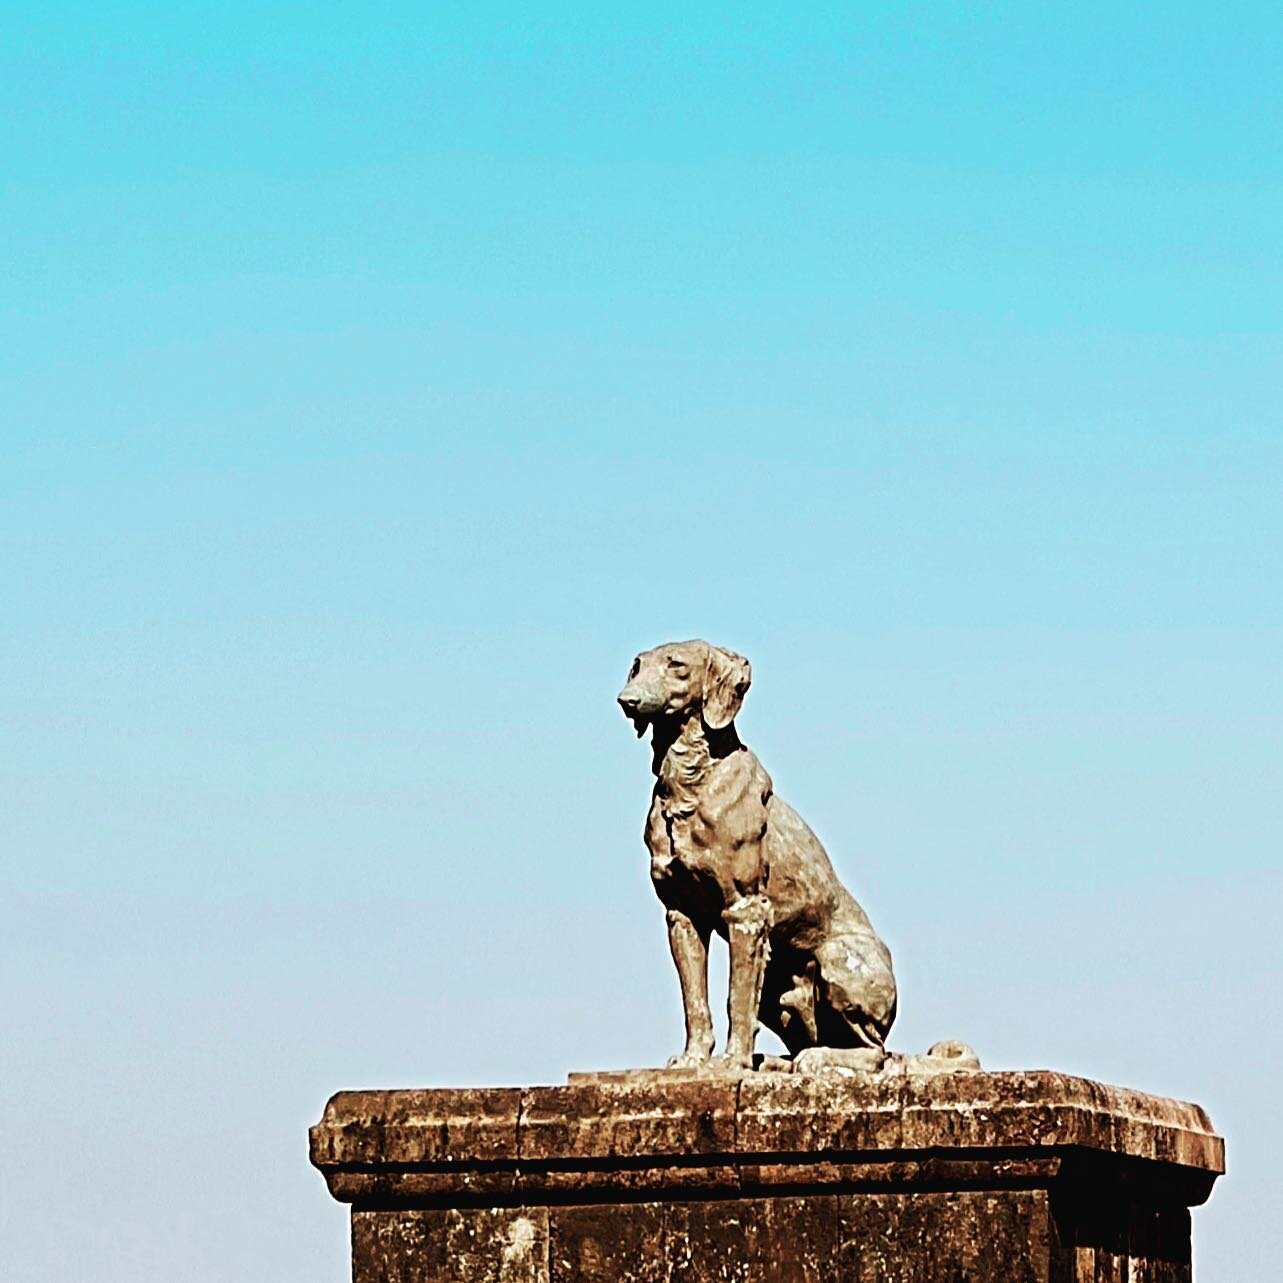 ...::WAGHYA::..
.
.
#mountains #dog #raigad #fort #travel #sky #blue #india #2023 #pictureoftheday #likeforlikes #nature #travelphotography #happy #green #mountains #solo_travel_er #shotoniphone